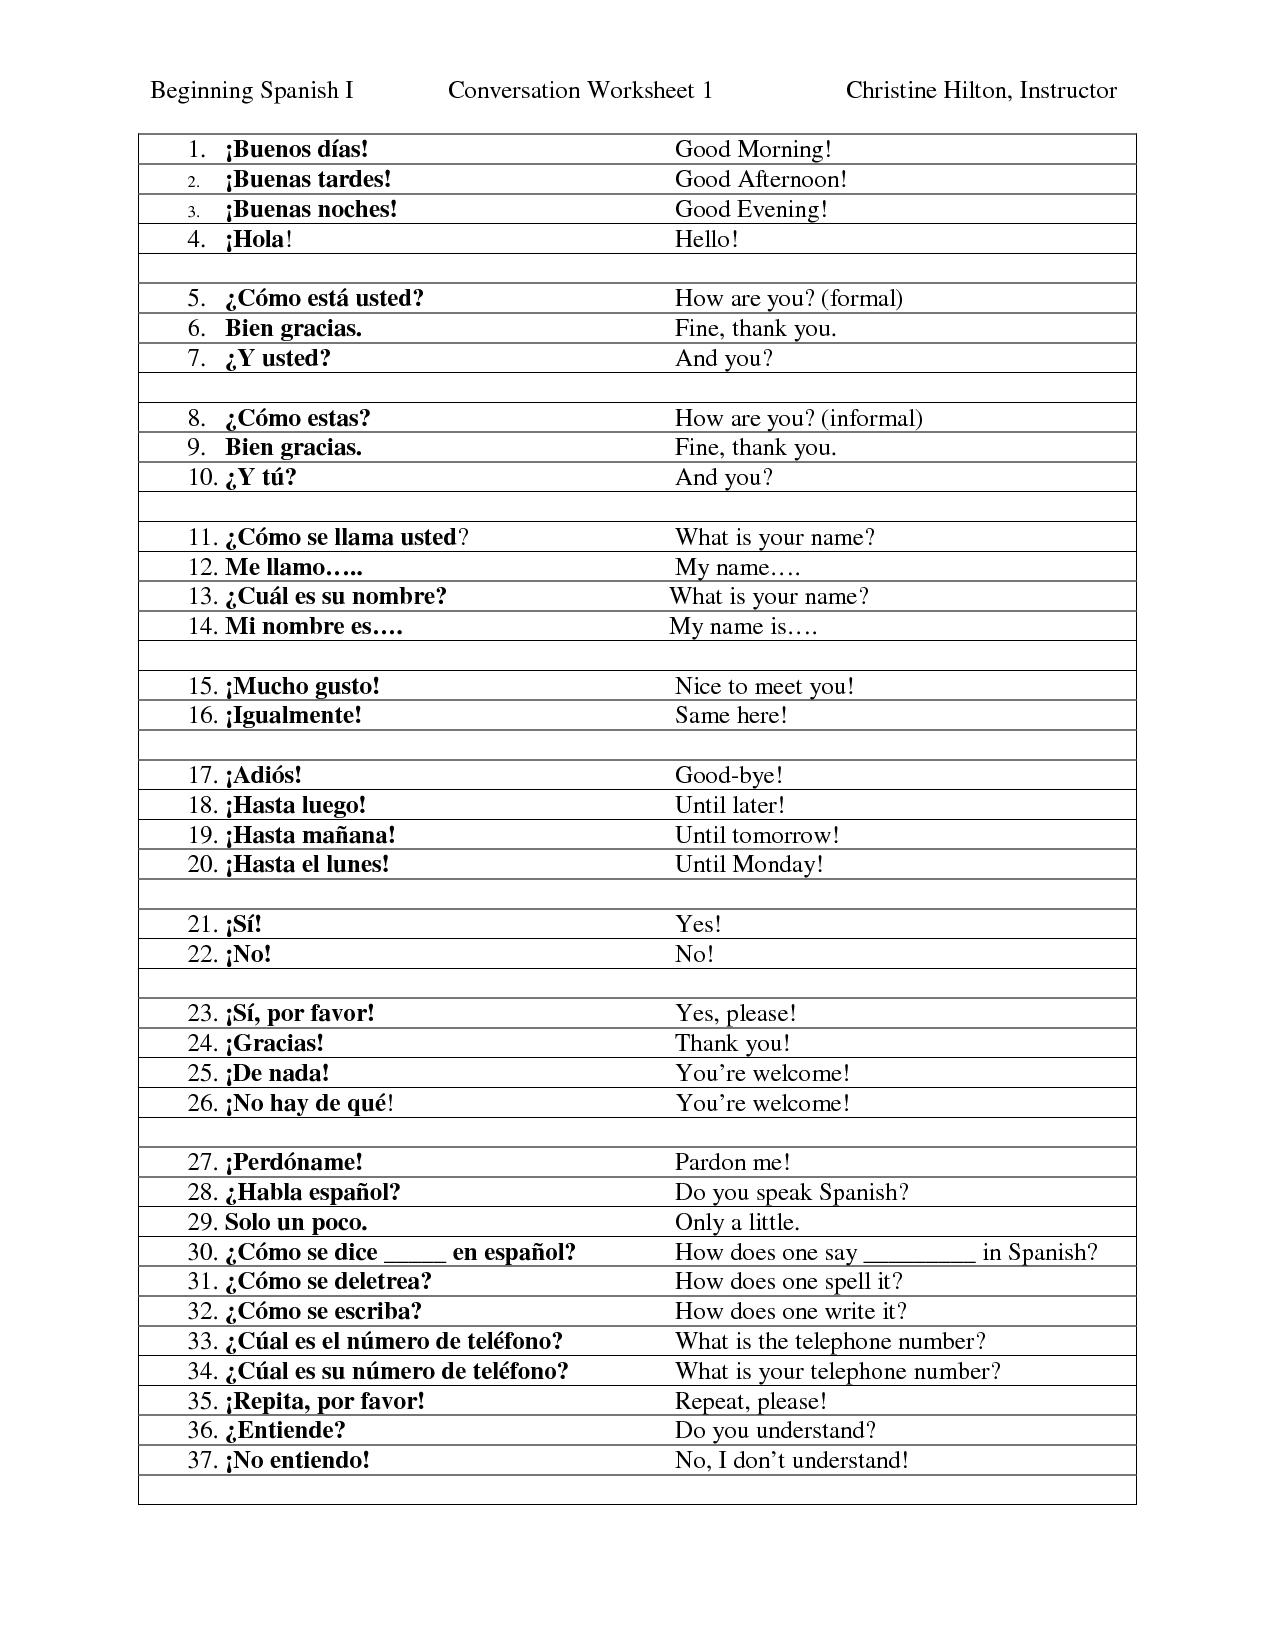 16-best-images-of-english-to-spanish-worksheets-for-beginners-beginner-spanish-worksheets